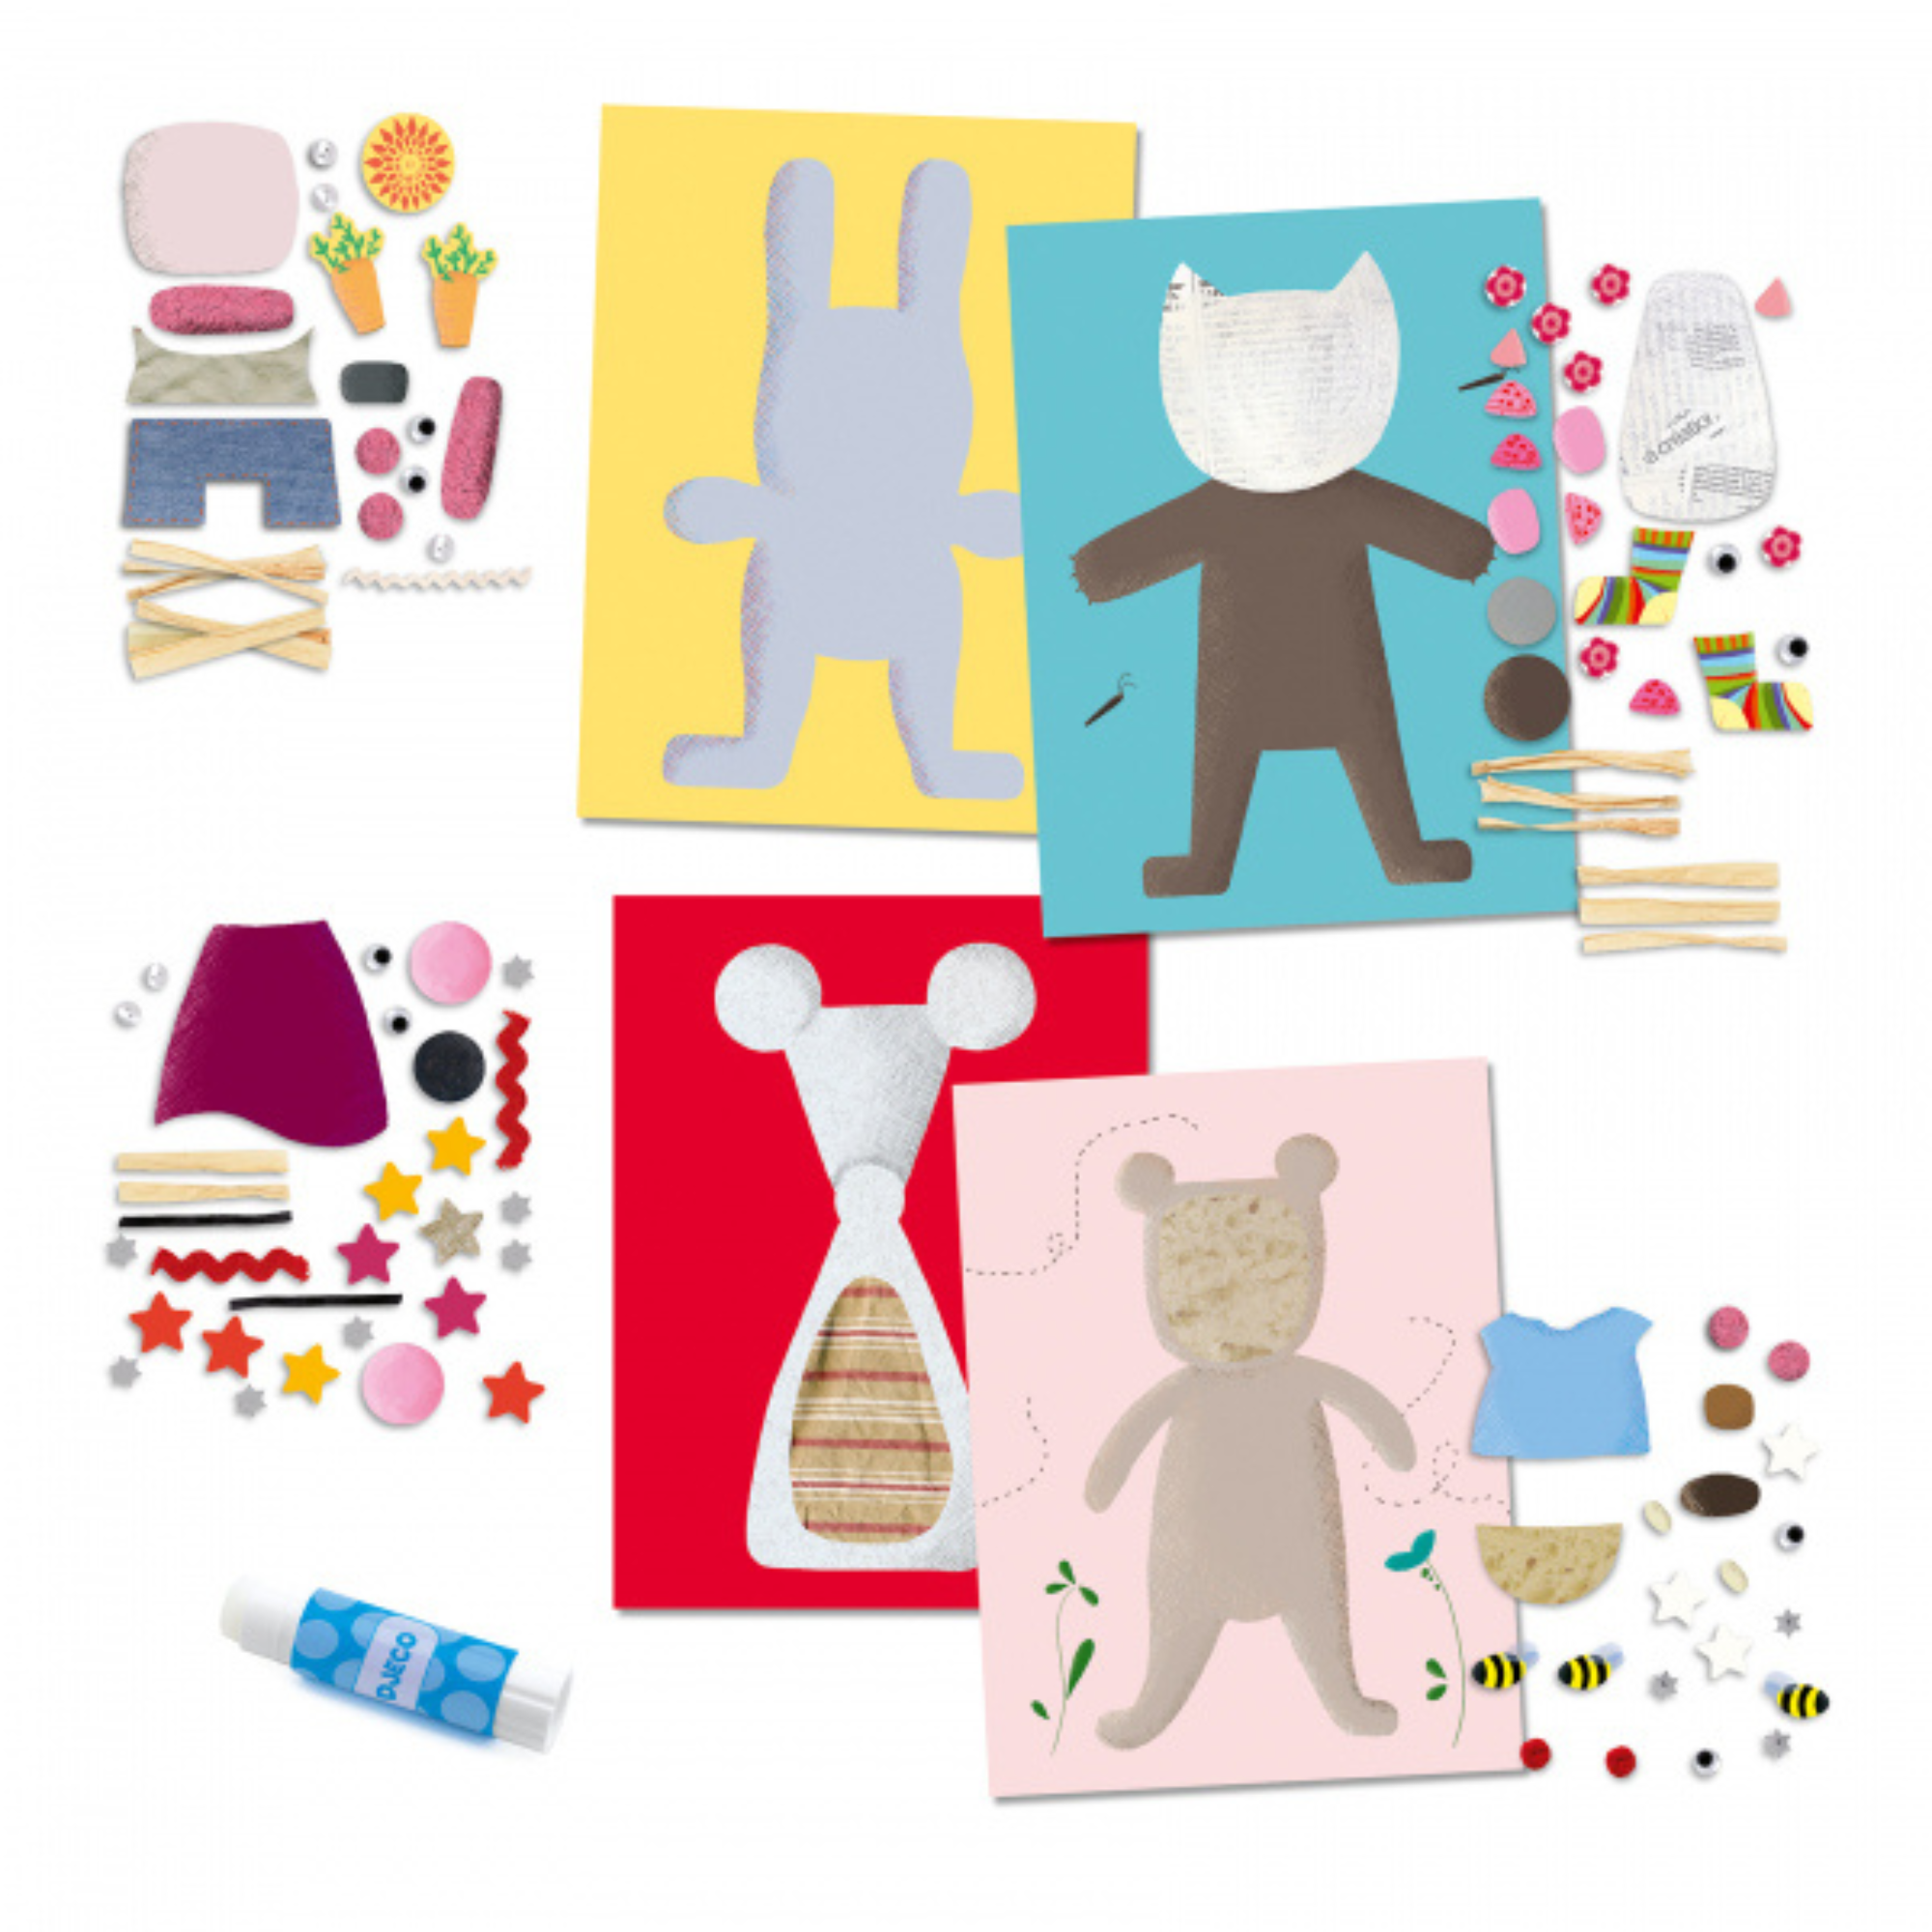 Creative set - Collages for the little ones - Animals